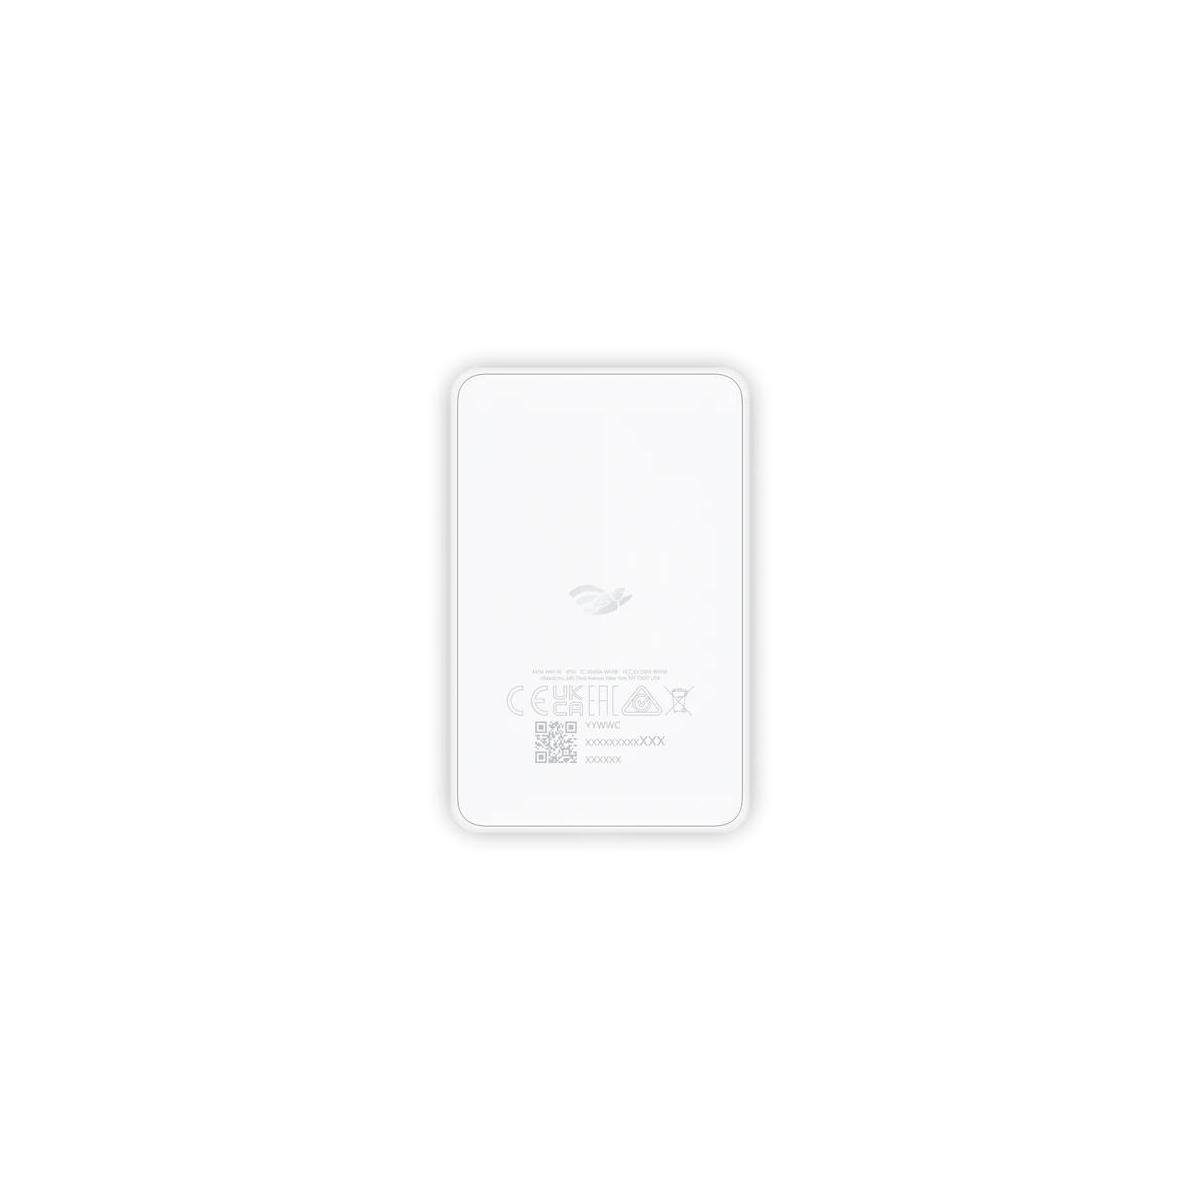 Ubiquiti WiFiMan-Assistent WLAN-Antenne Networks